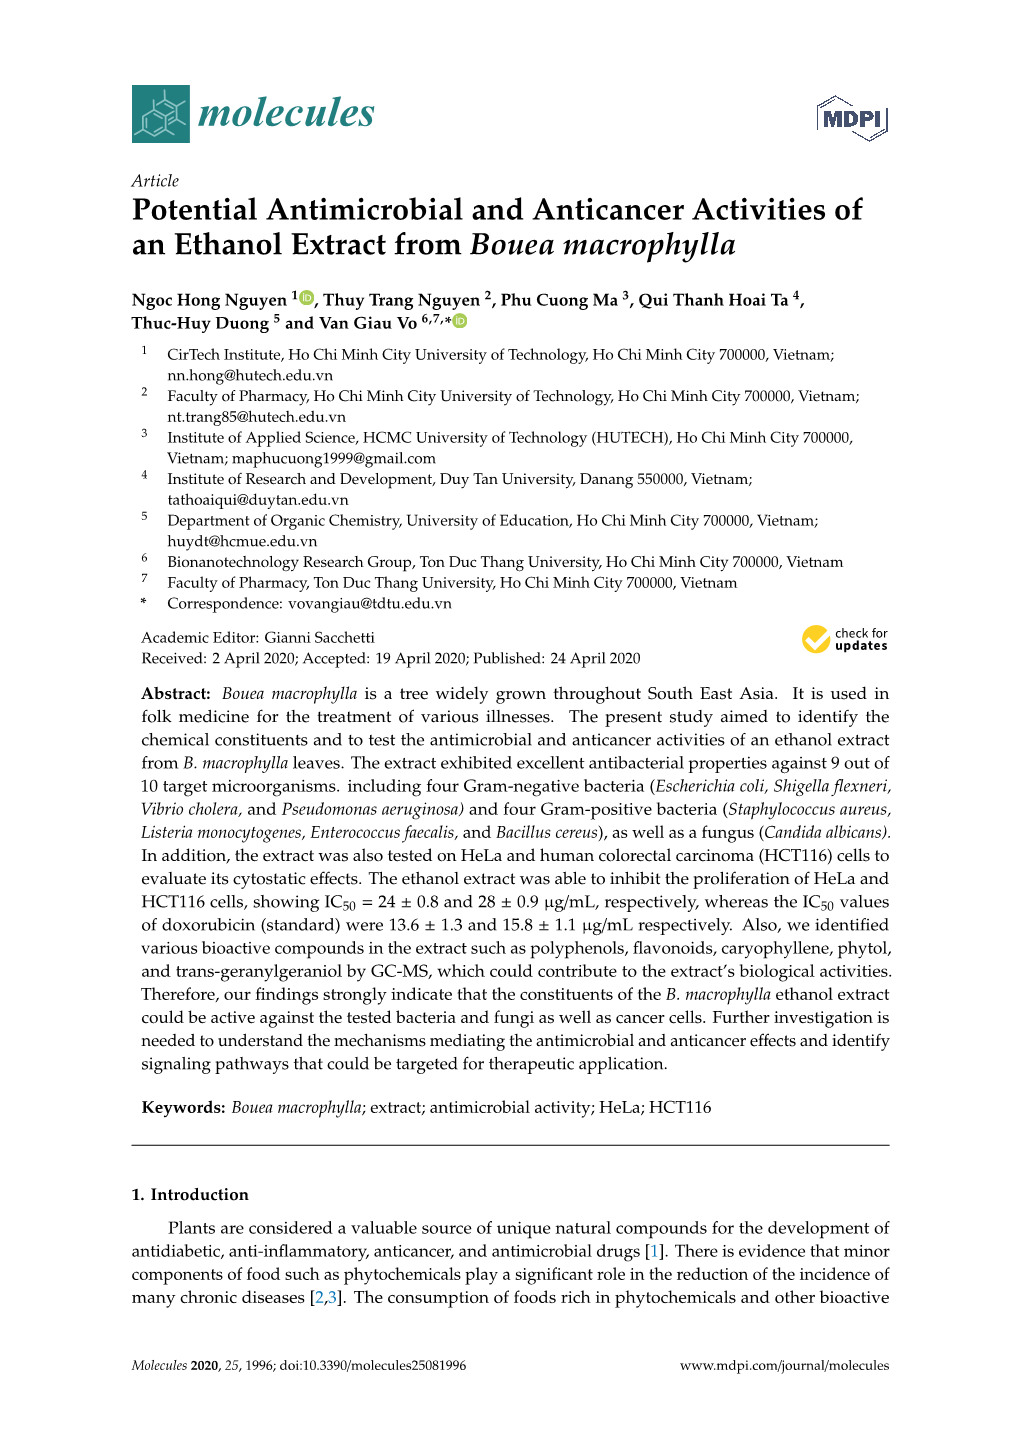 Potential Antimicrobial and Anticancer Activities of an Ethanol Extract from Bouea Macrophylla